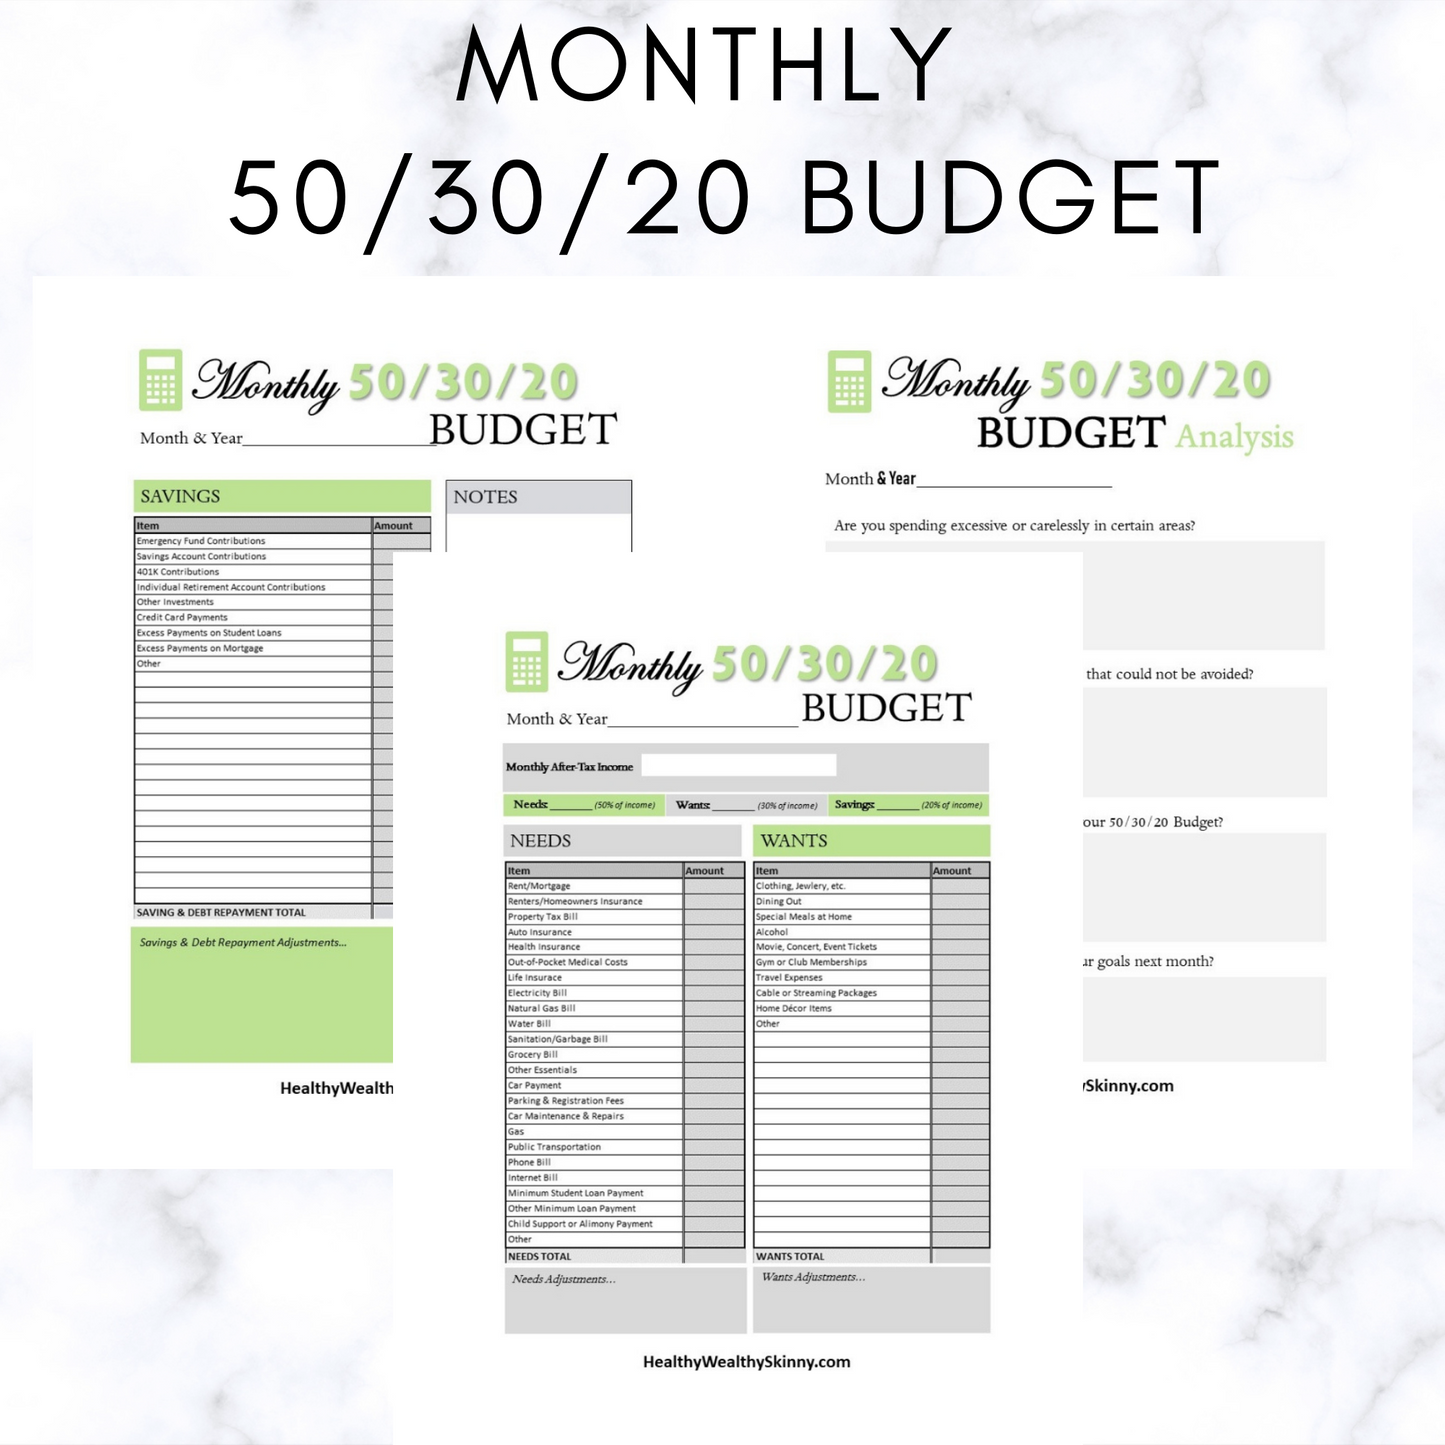 Monthly 50/30/20 Budget Worksheet PDF (Available In Various Colors) - Healthy Wealthy Skinny